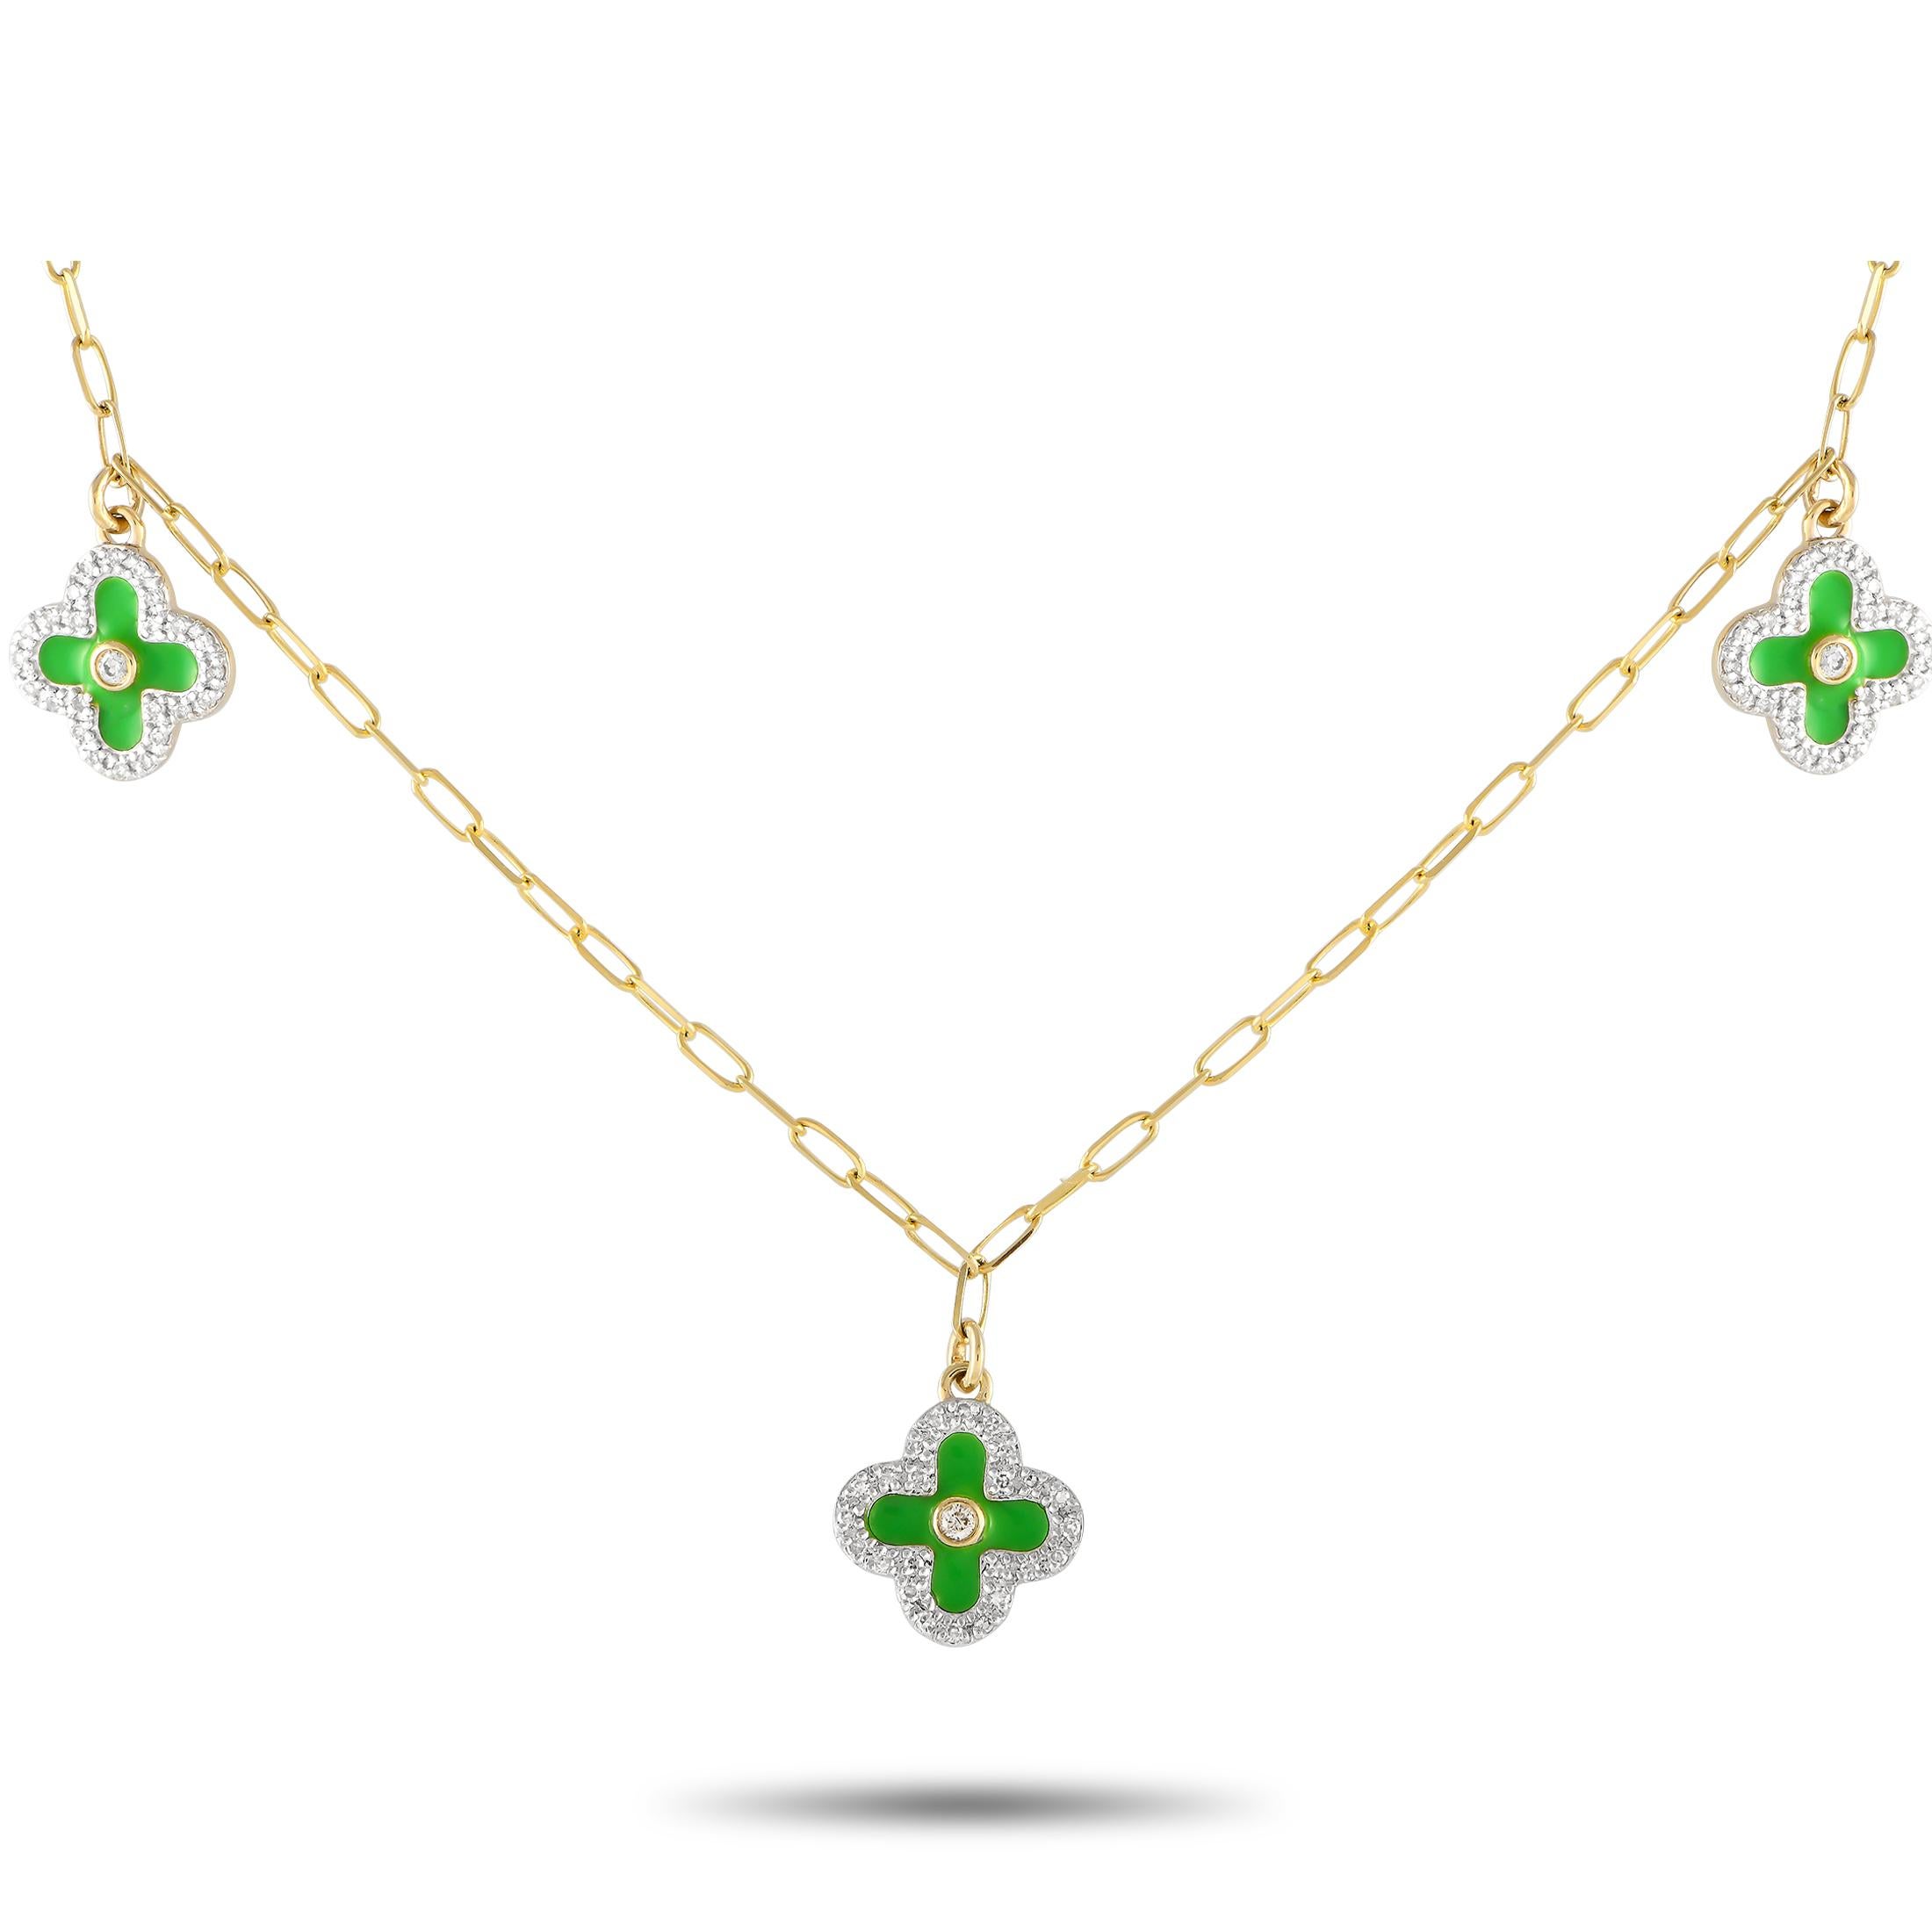 14K Yellow Gold 0.25ct Diamondand Green Enamel Three Flower Necklace NK01431 In New Condition For Sale In Southampton, PA